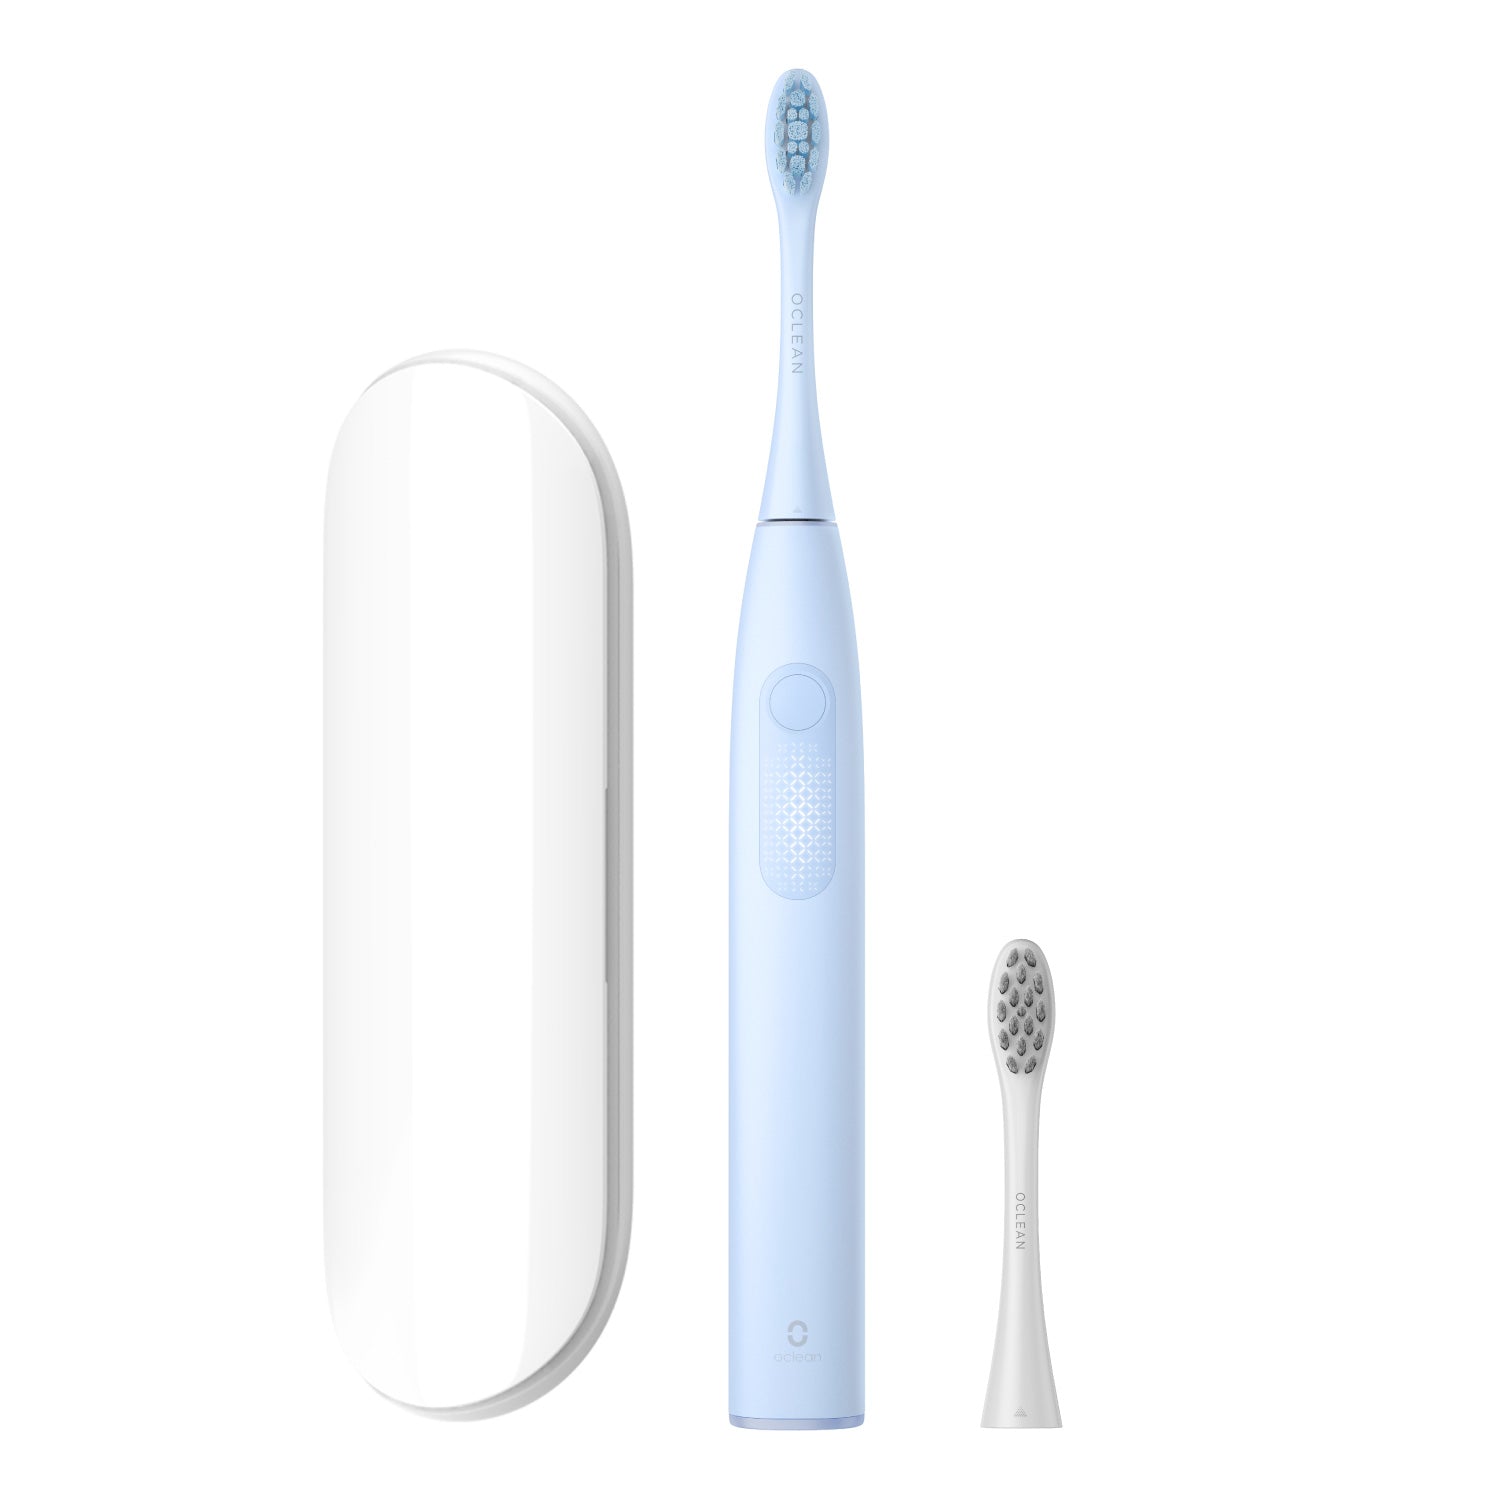 Oclean F1 Sonic Electric Toothbrush-Toothbrushes-Oclean Global Store